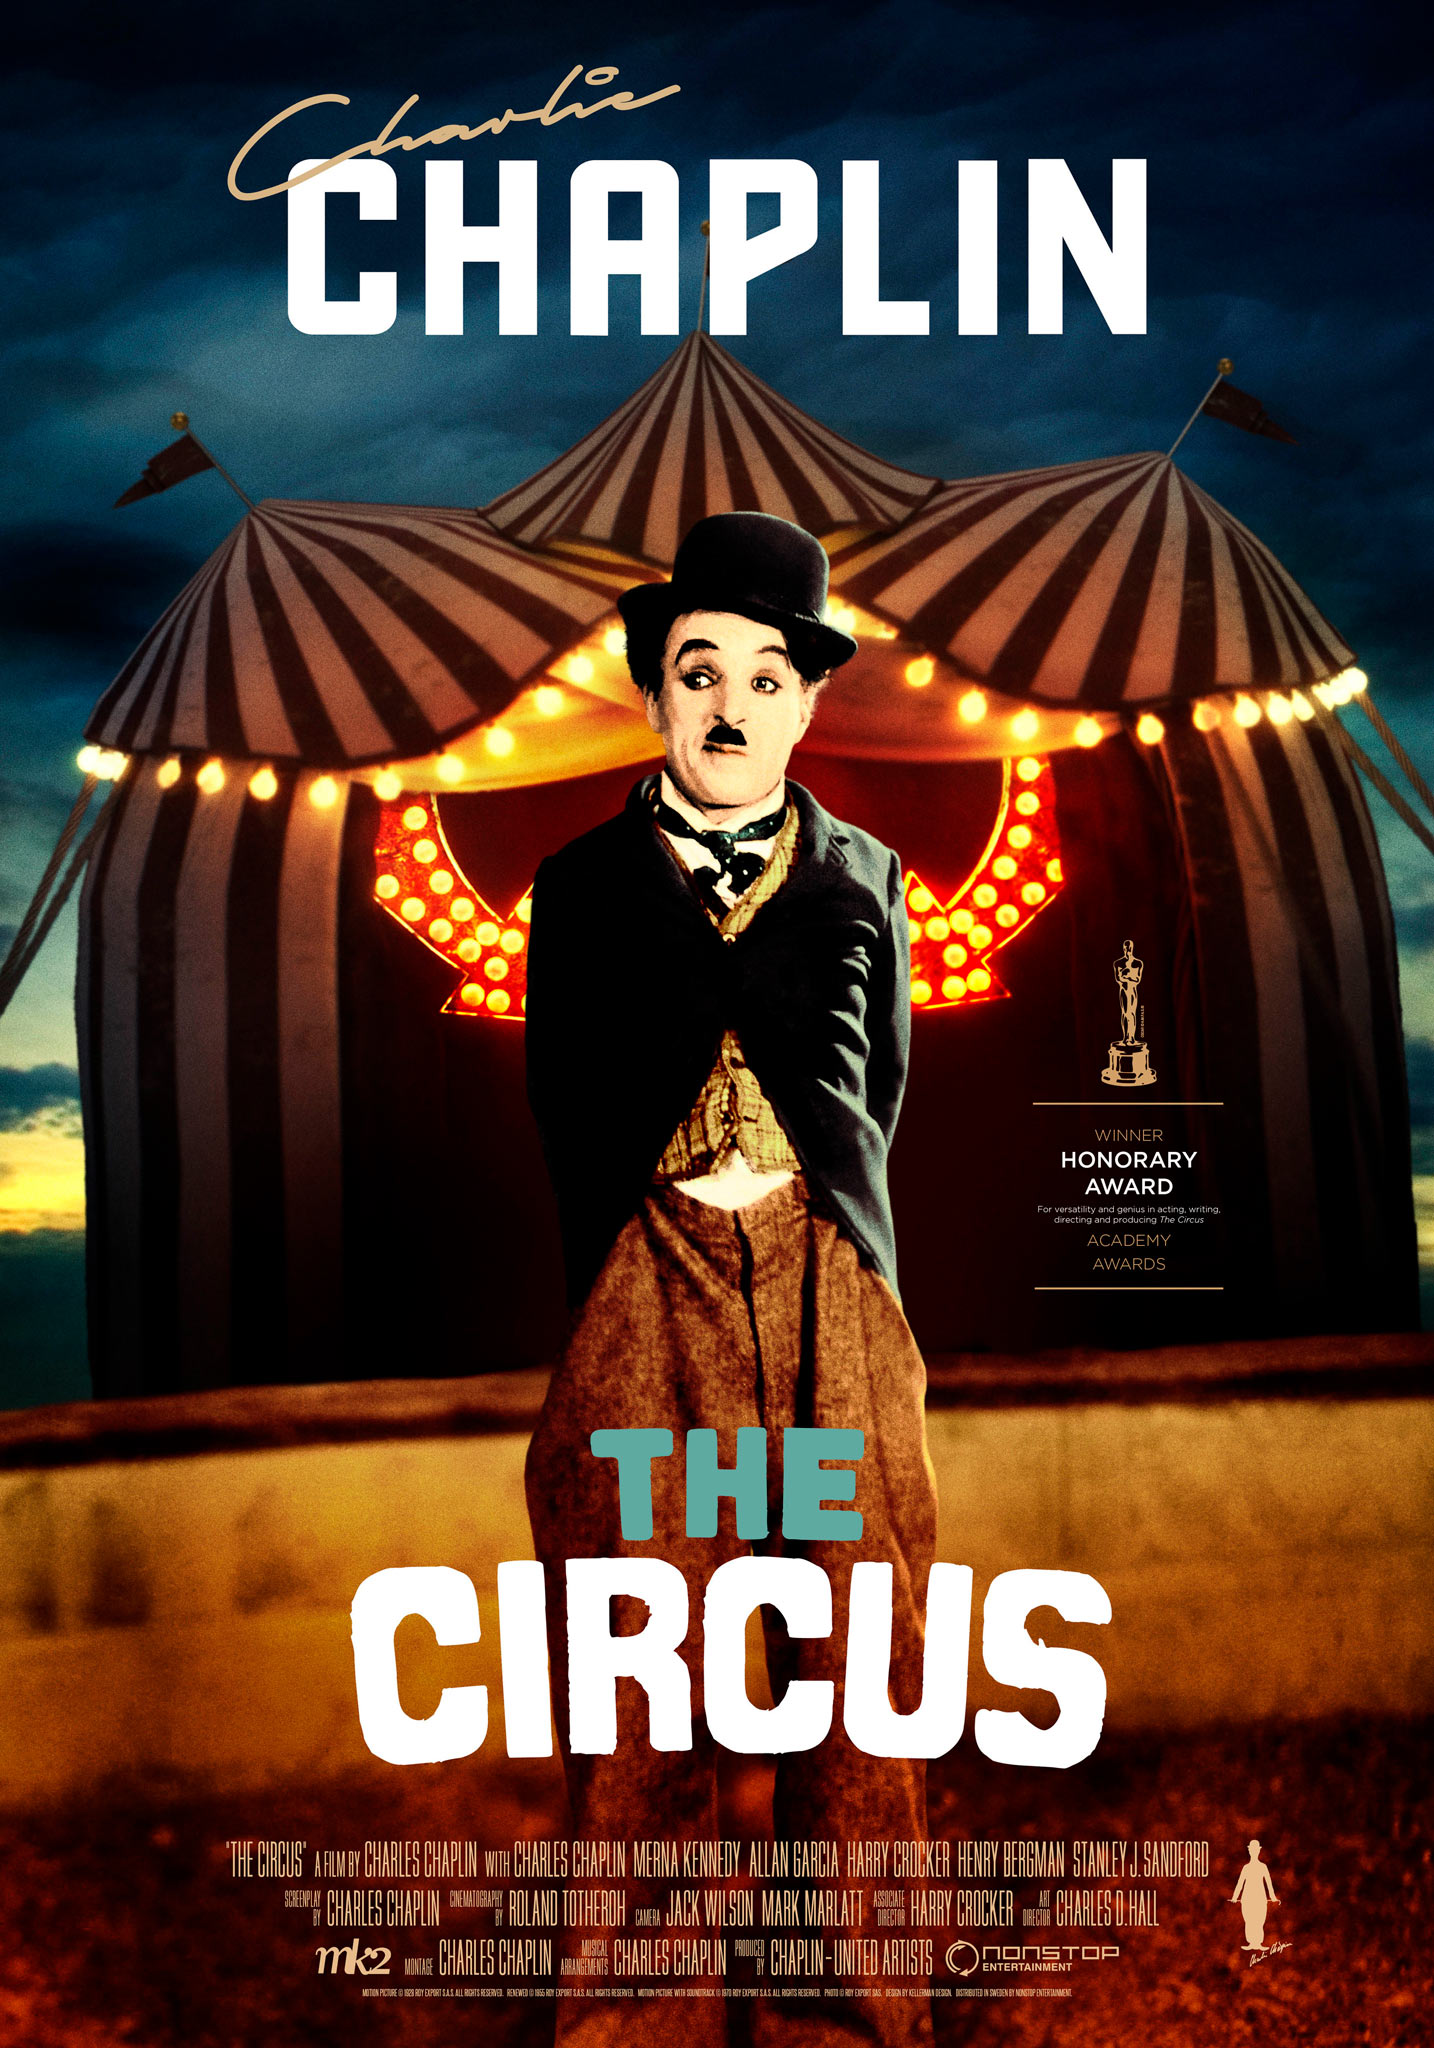 The Circus (1928) theatrical onesheet